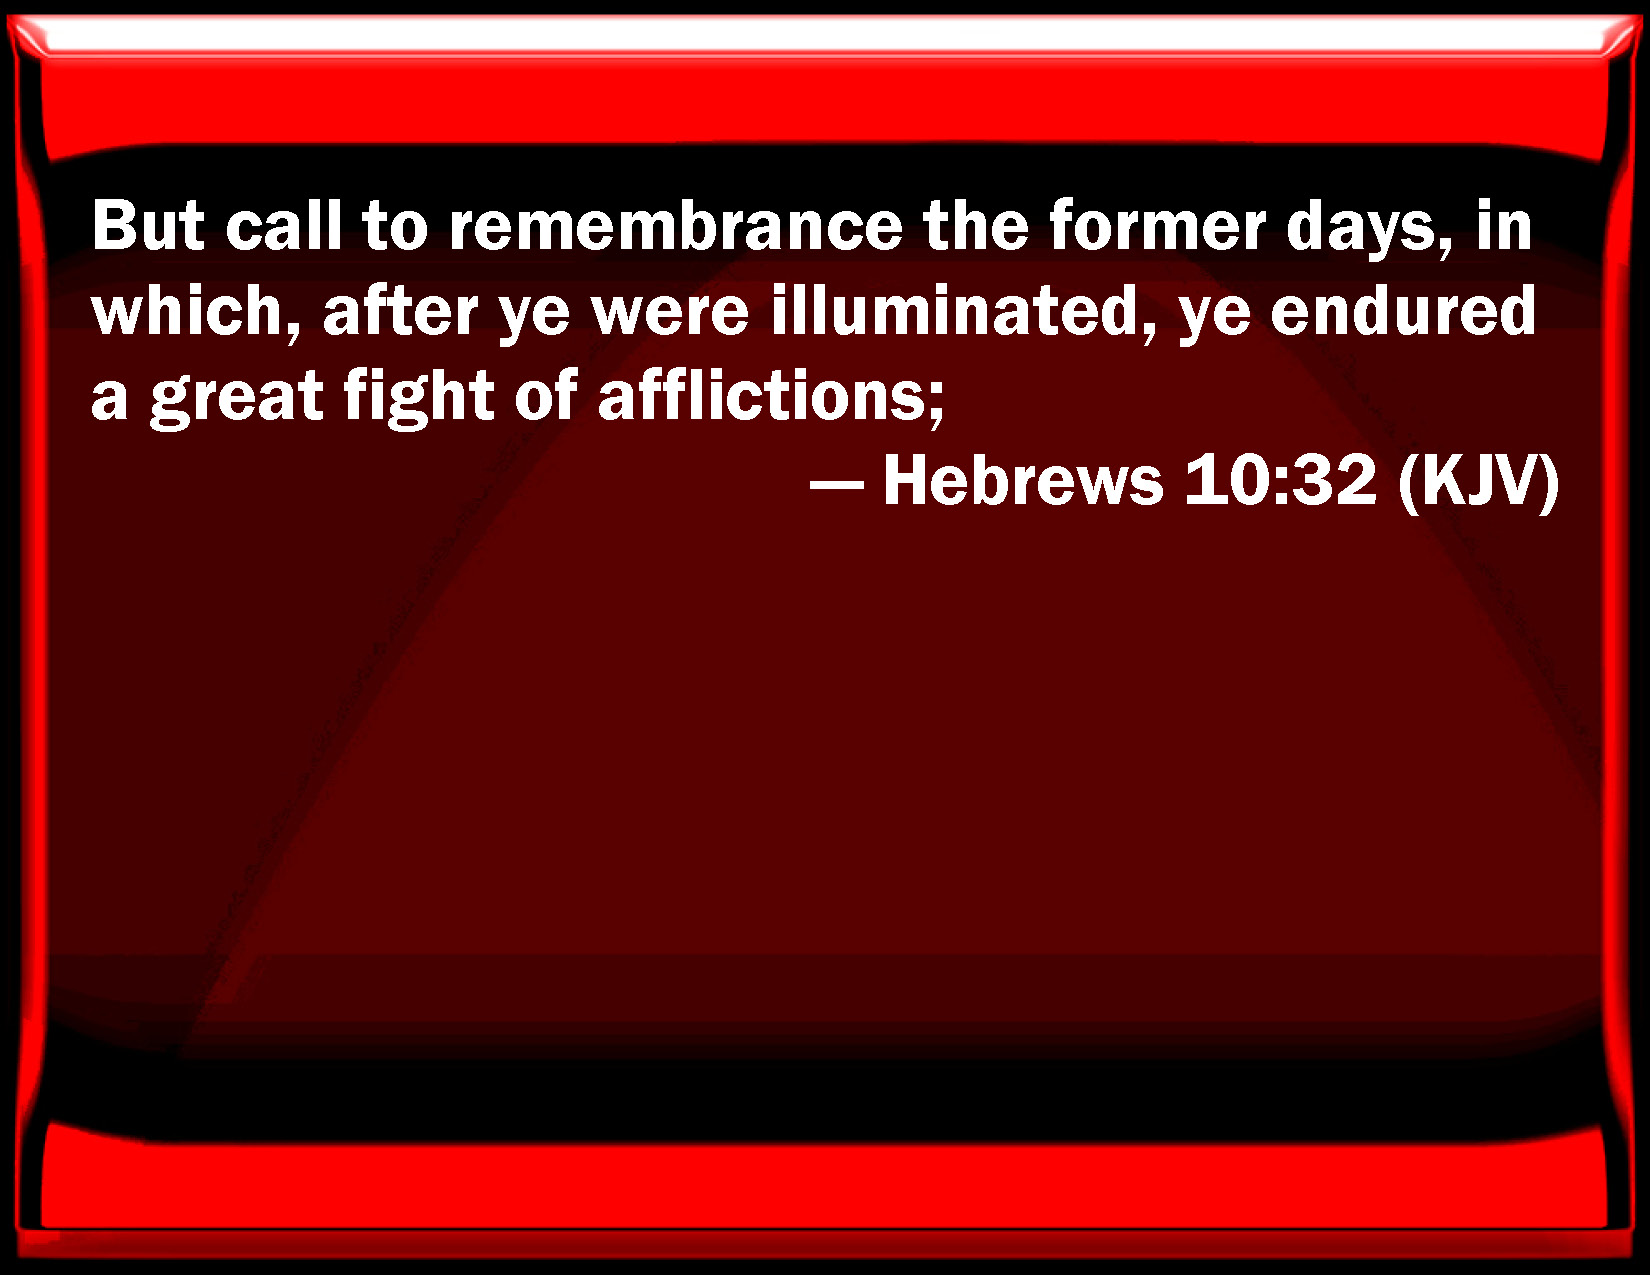 hebrews-10-32-but-call-to-remembrance-the-former-days-in-which-after